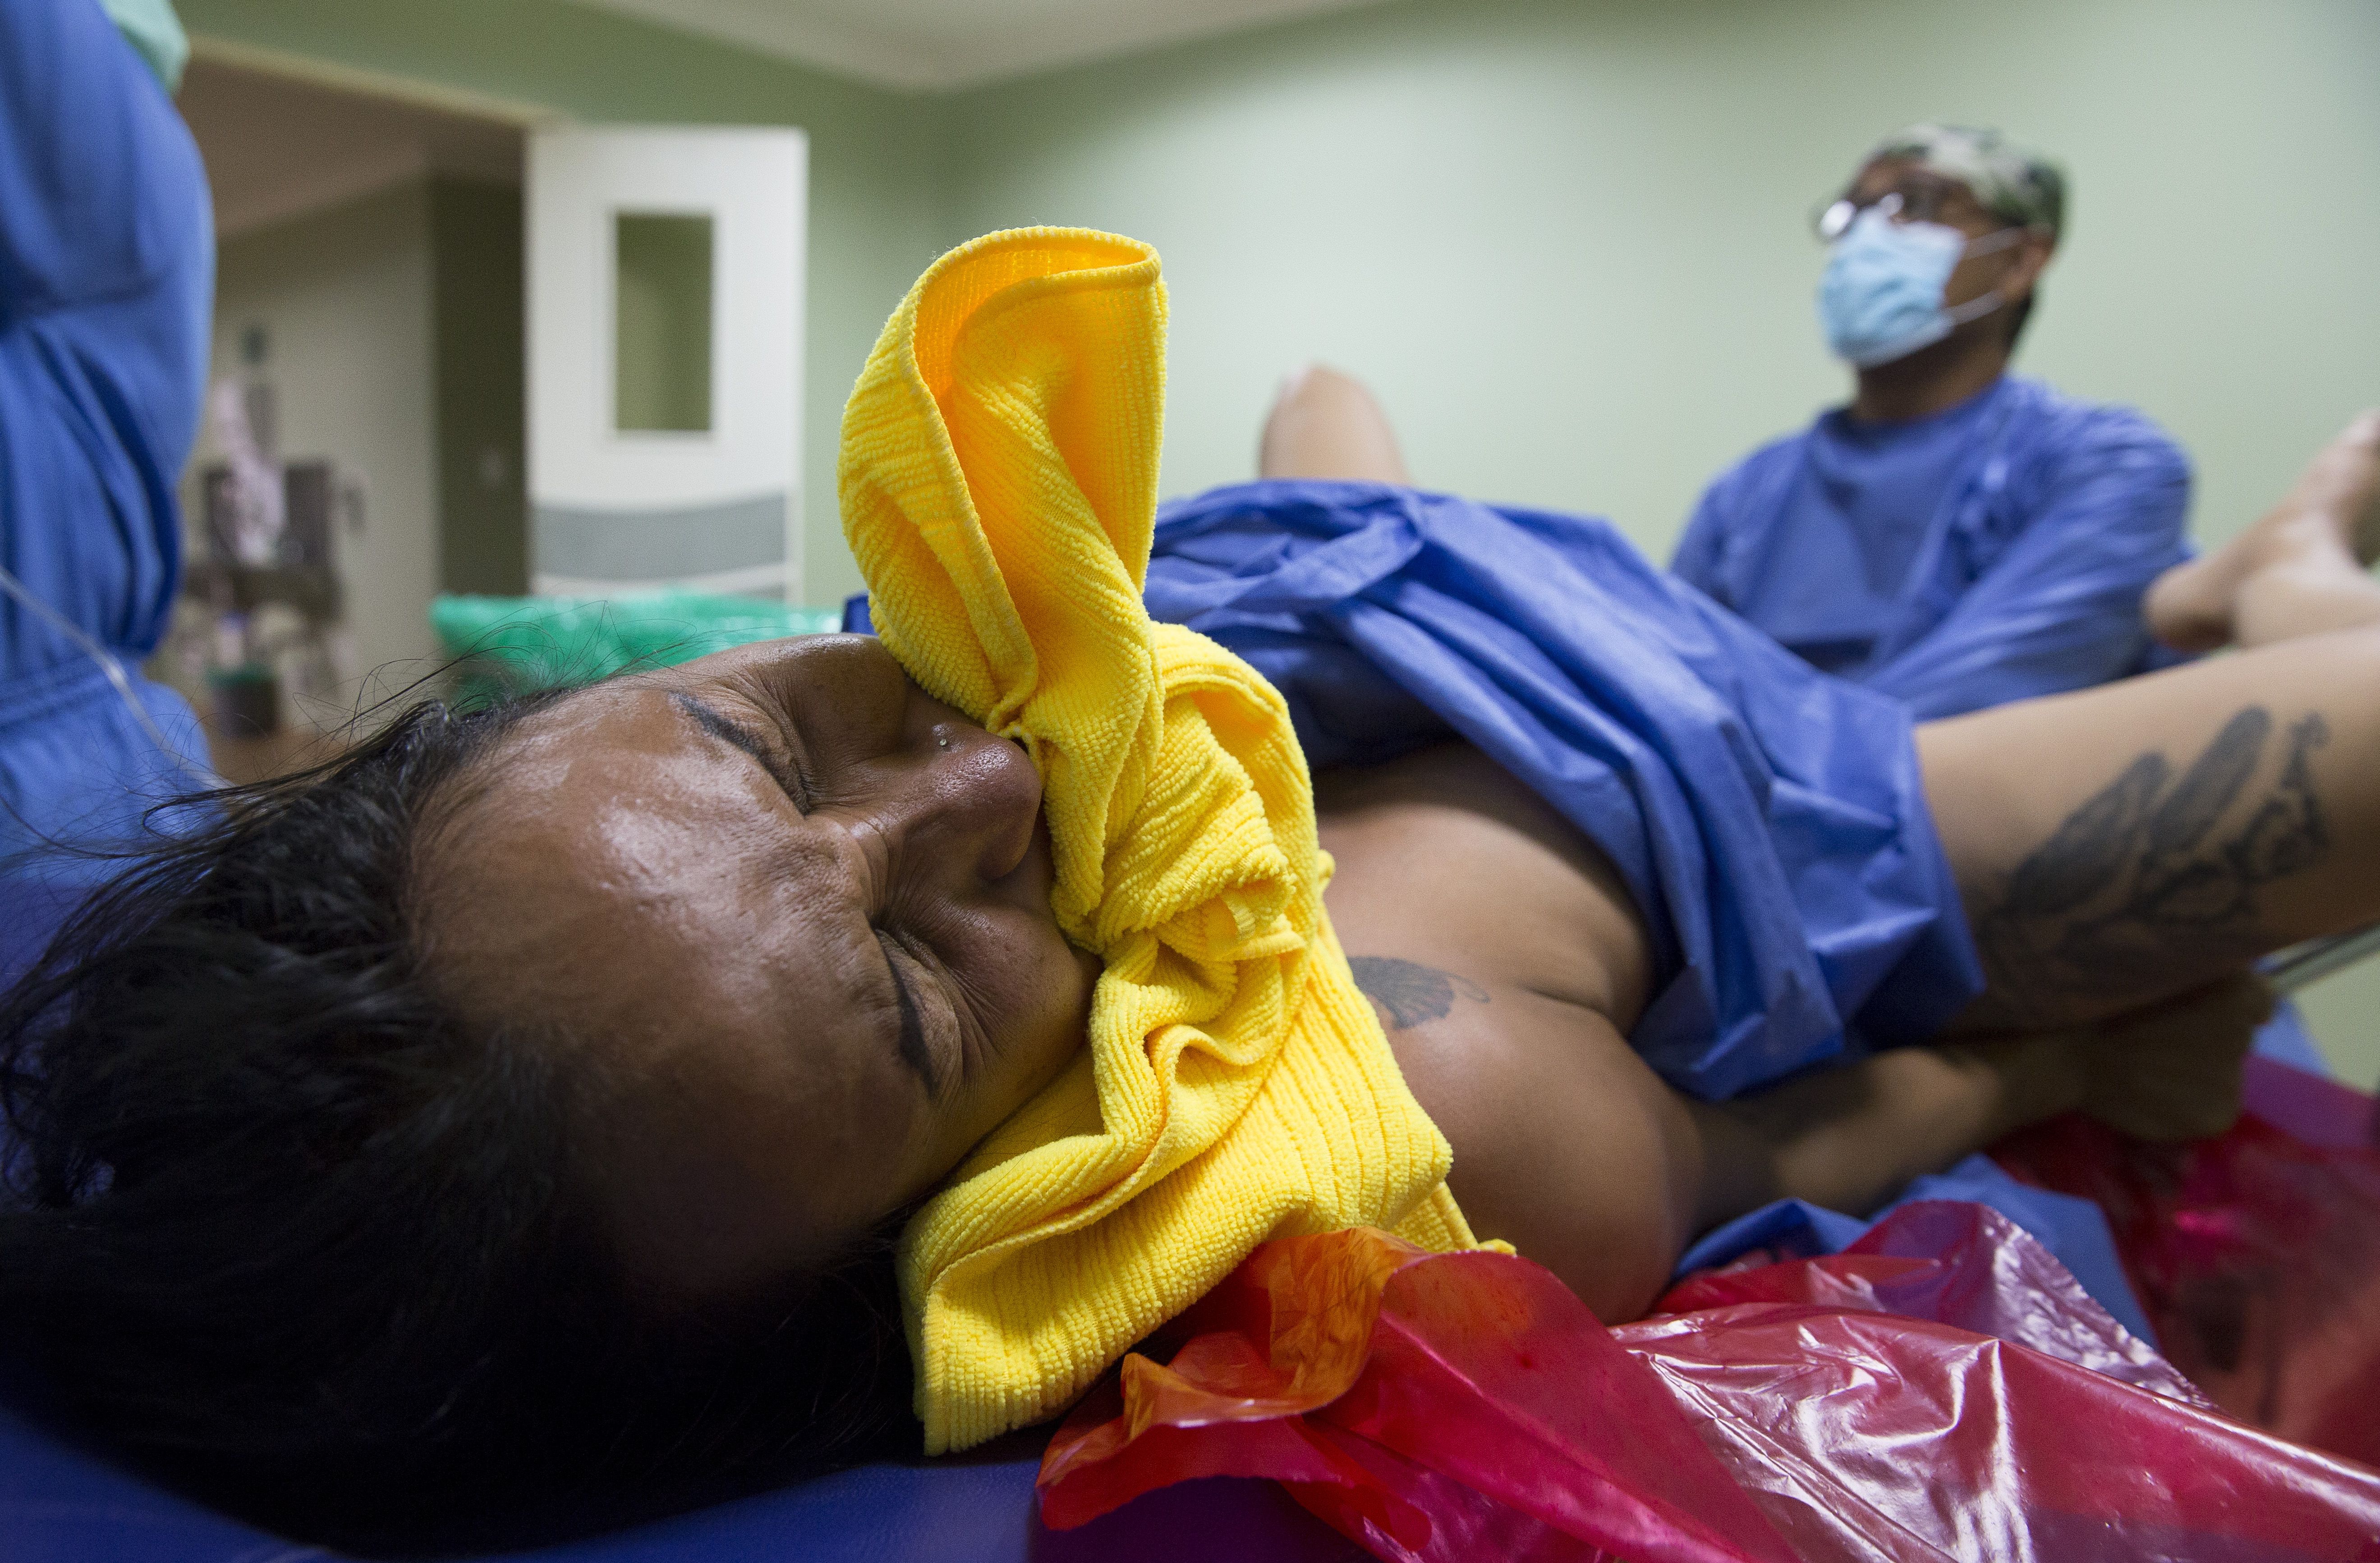 Yulianis Rodriguez gave birth alone in Colombia without an epidural. Image by Megan Janetsky. Colombia, 2019.